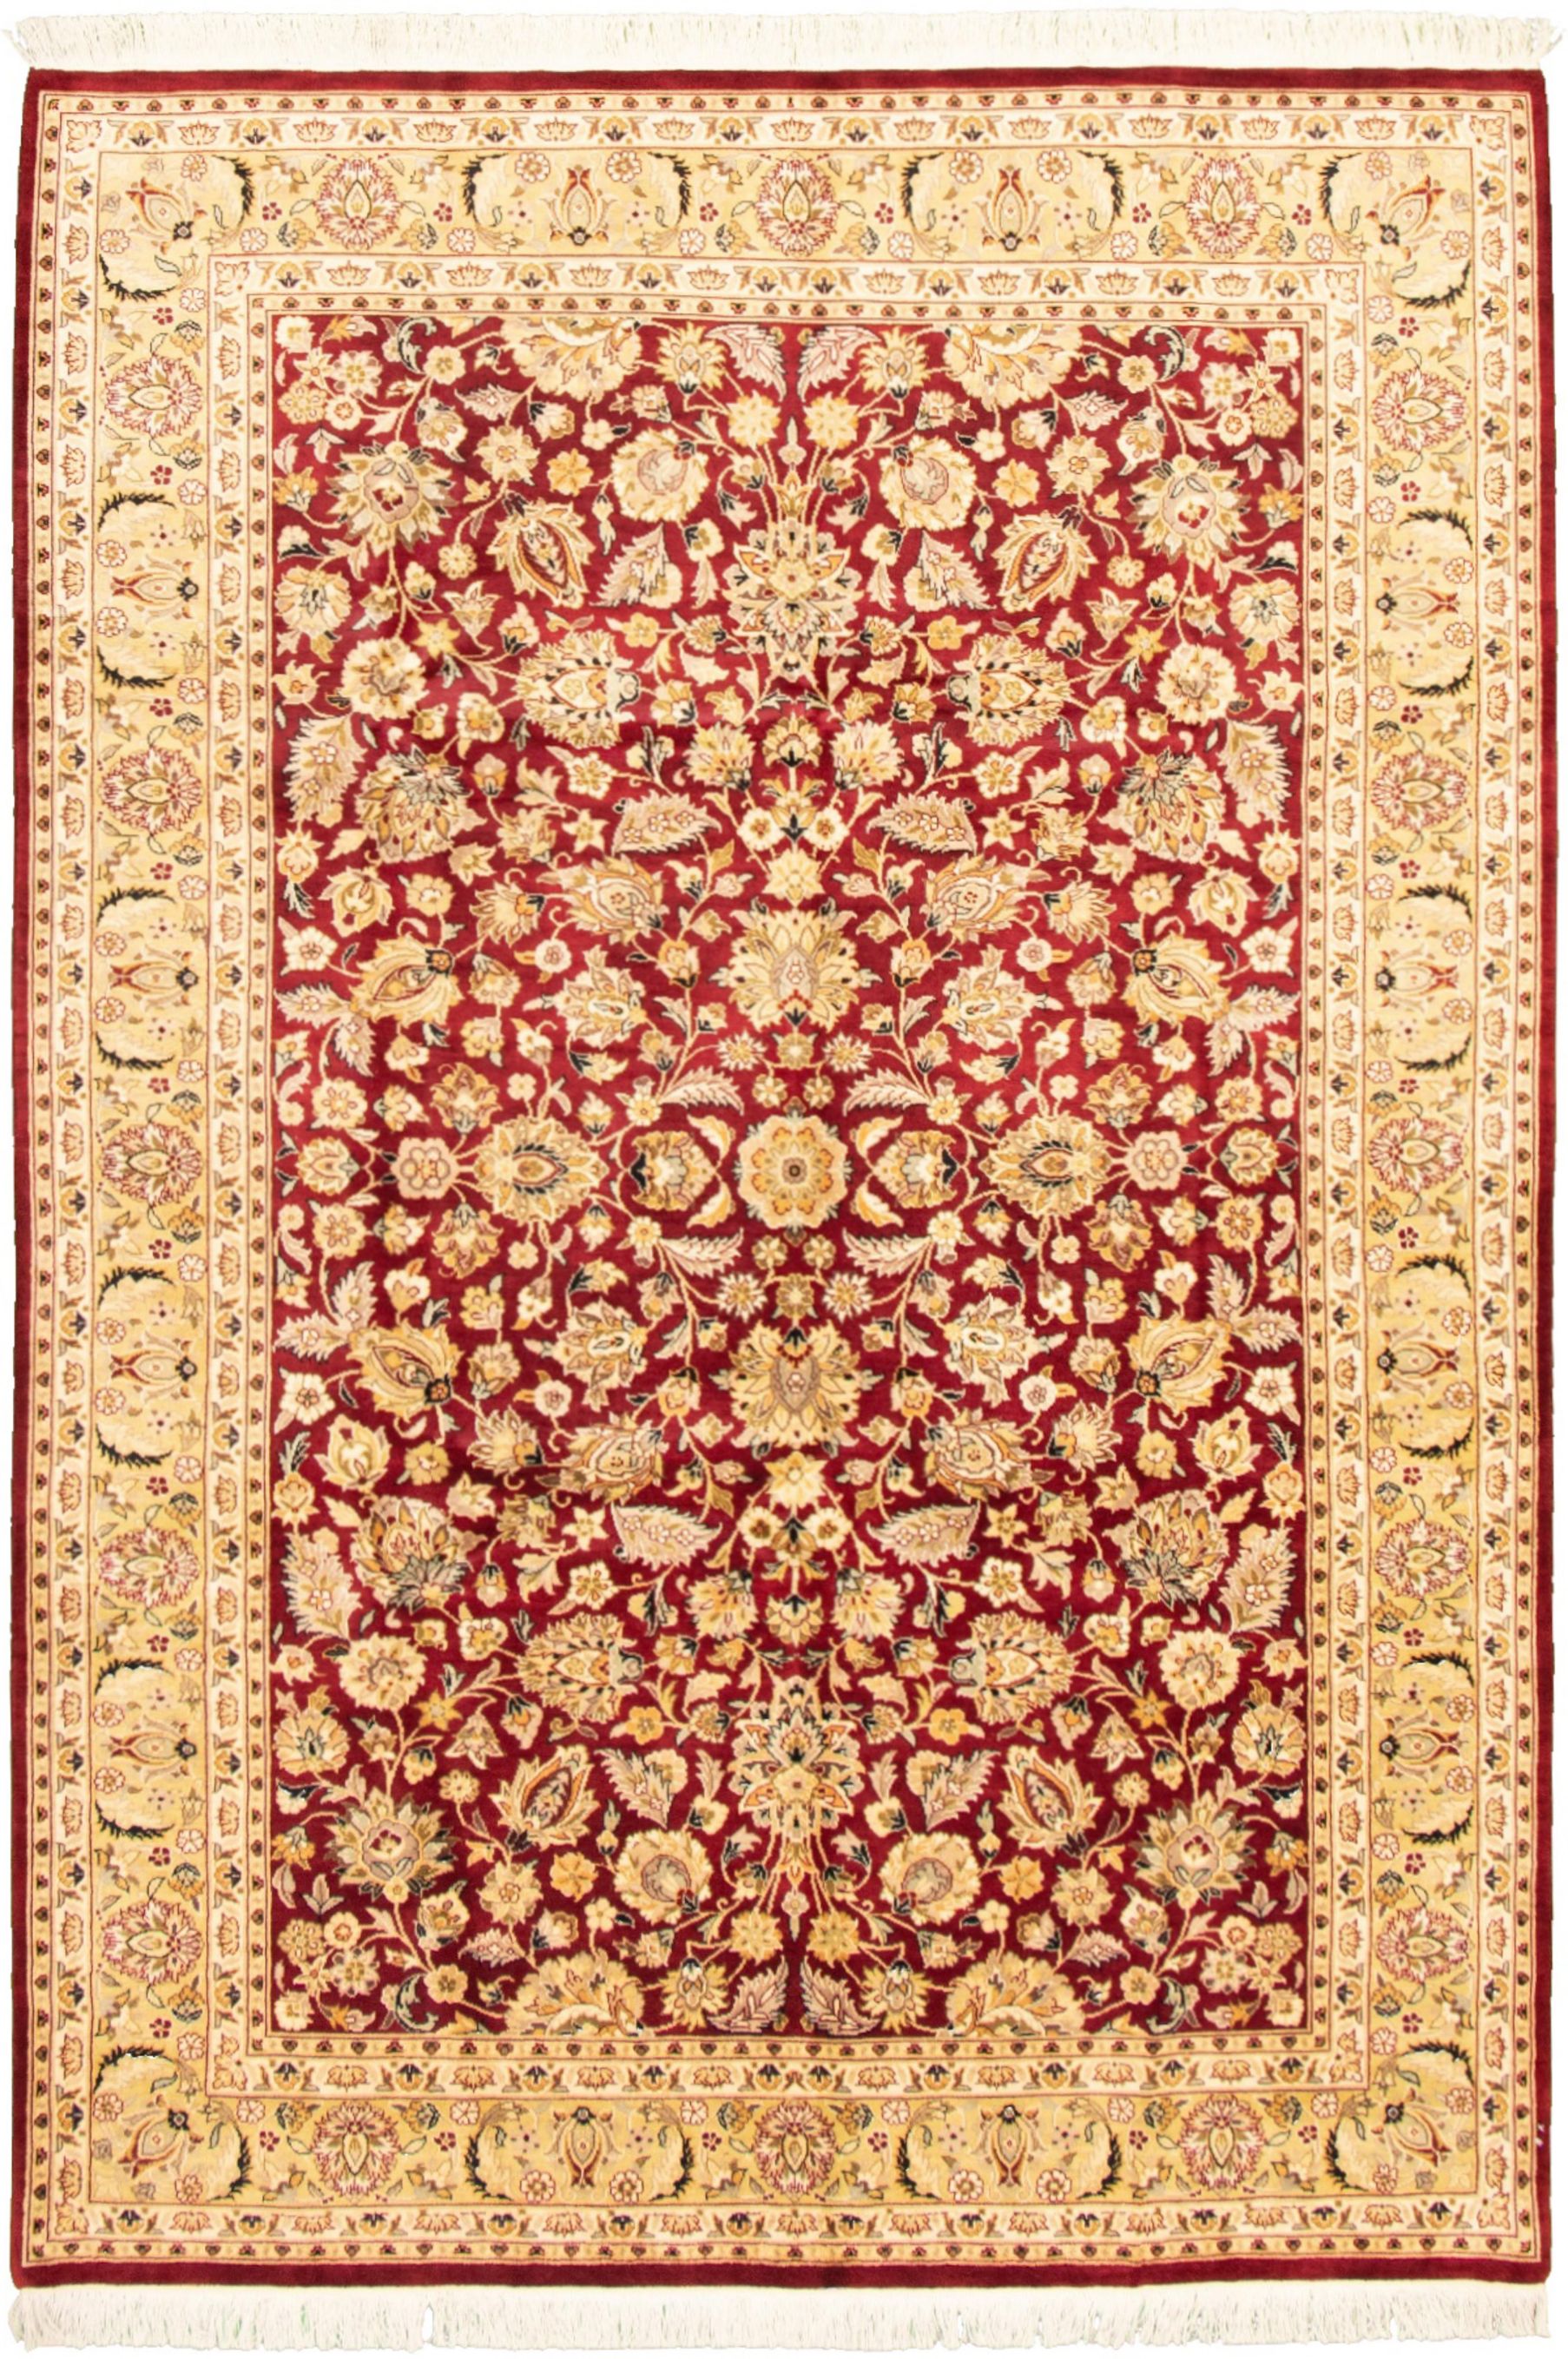 Hand-knotted Pako Persian 18/20 Red Wool Rug 6'3" x 9'3" Size: 6'3" x 9'3"  